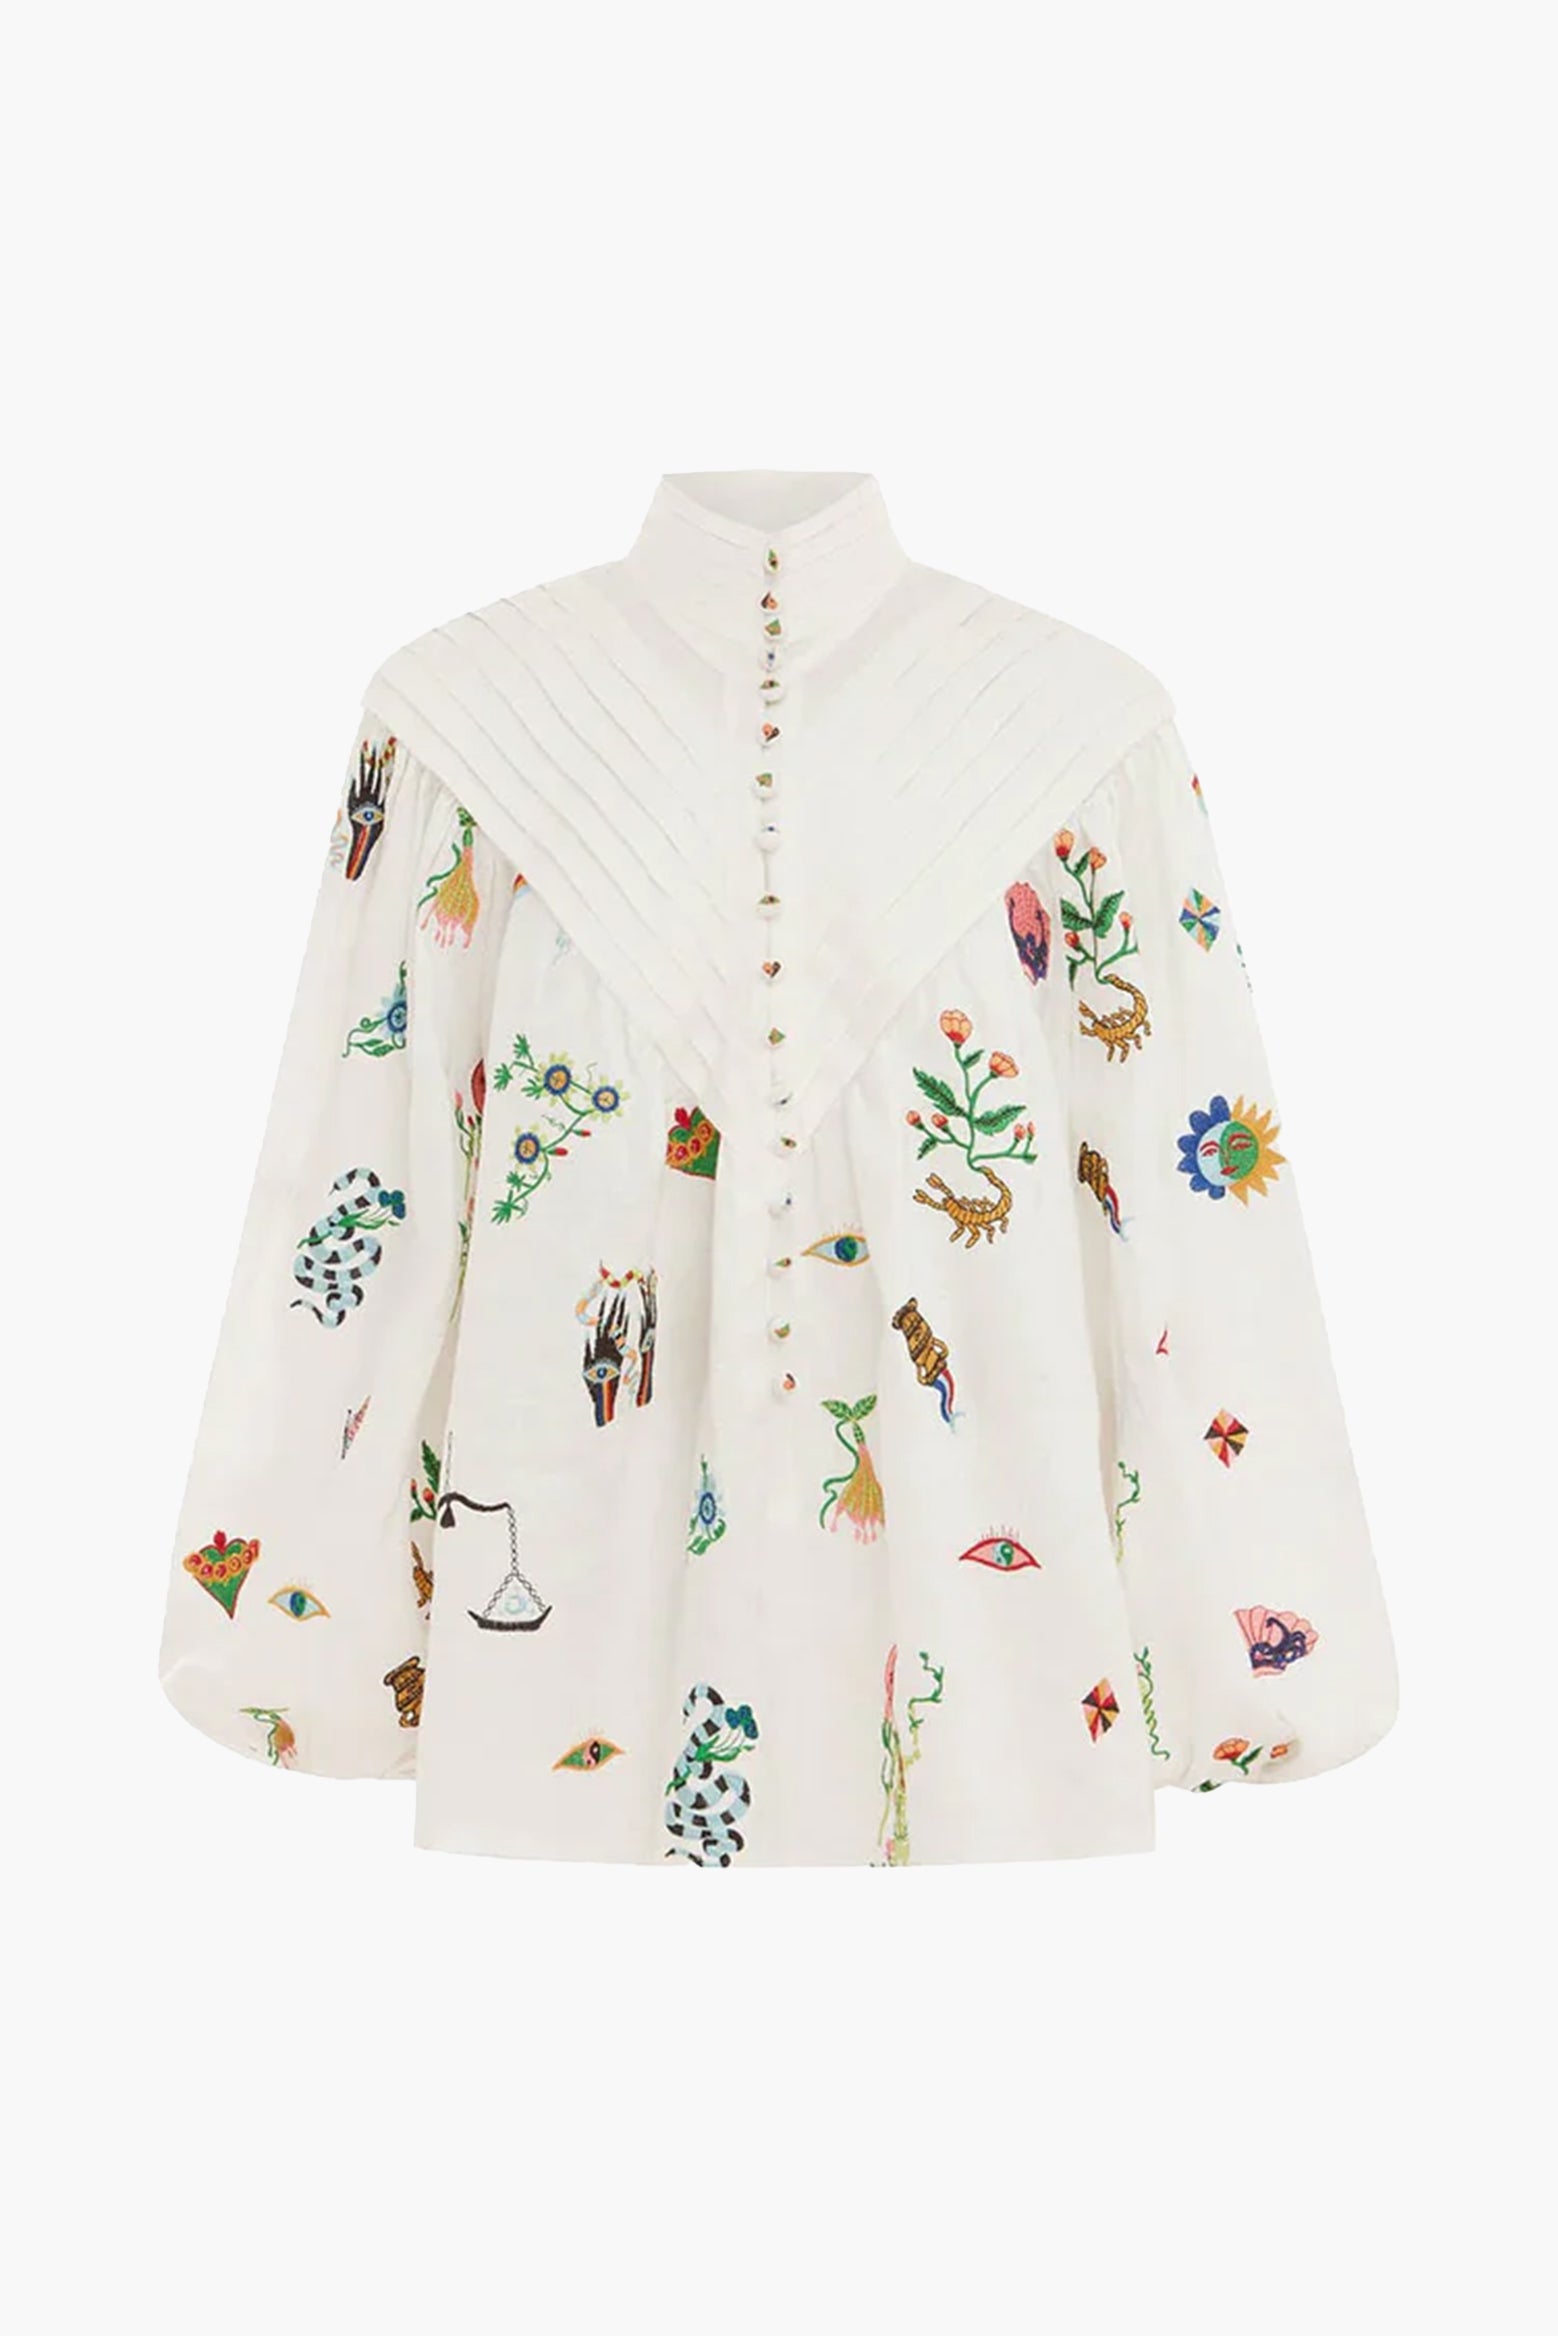 Alémais Atticus Embroidered Shirt in Cream available at The New Trend Australia.